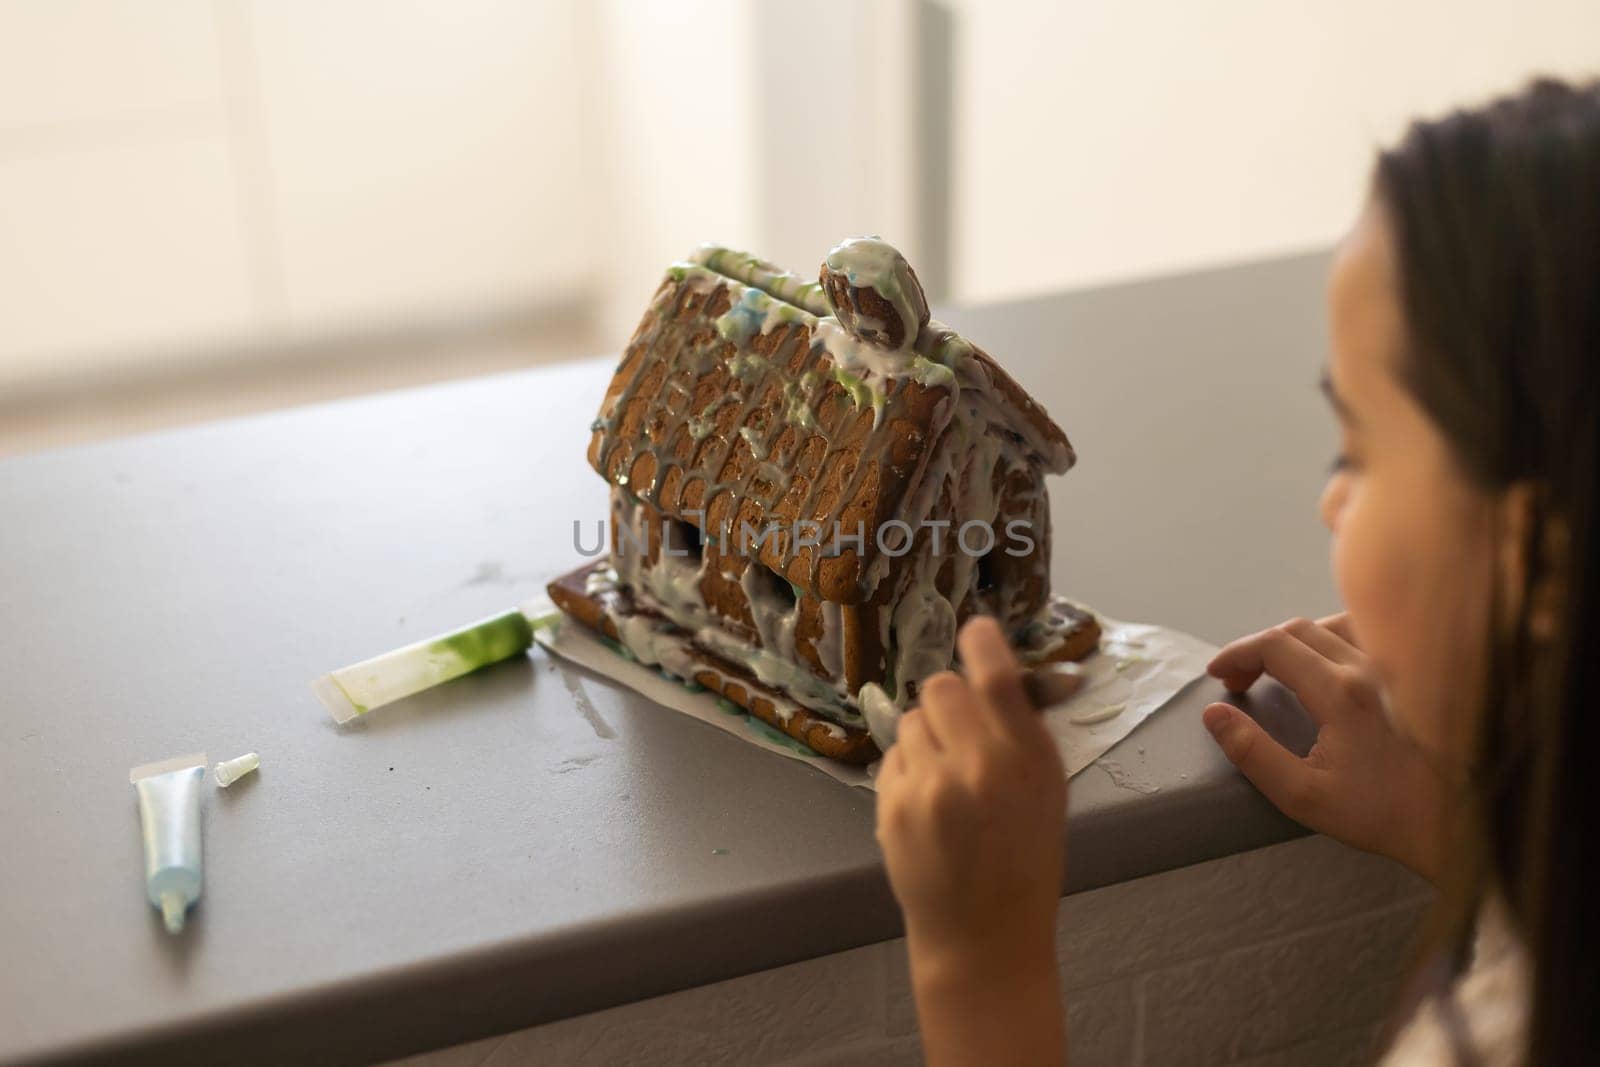 A girl plays with a gingerbread house for traditional Christmas decoration.